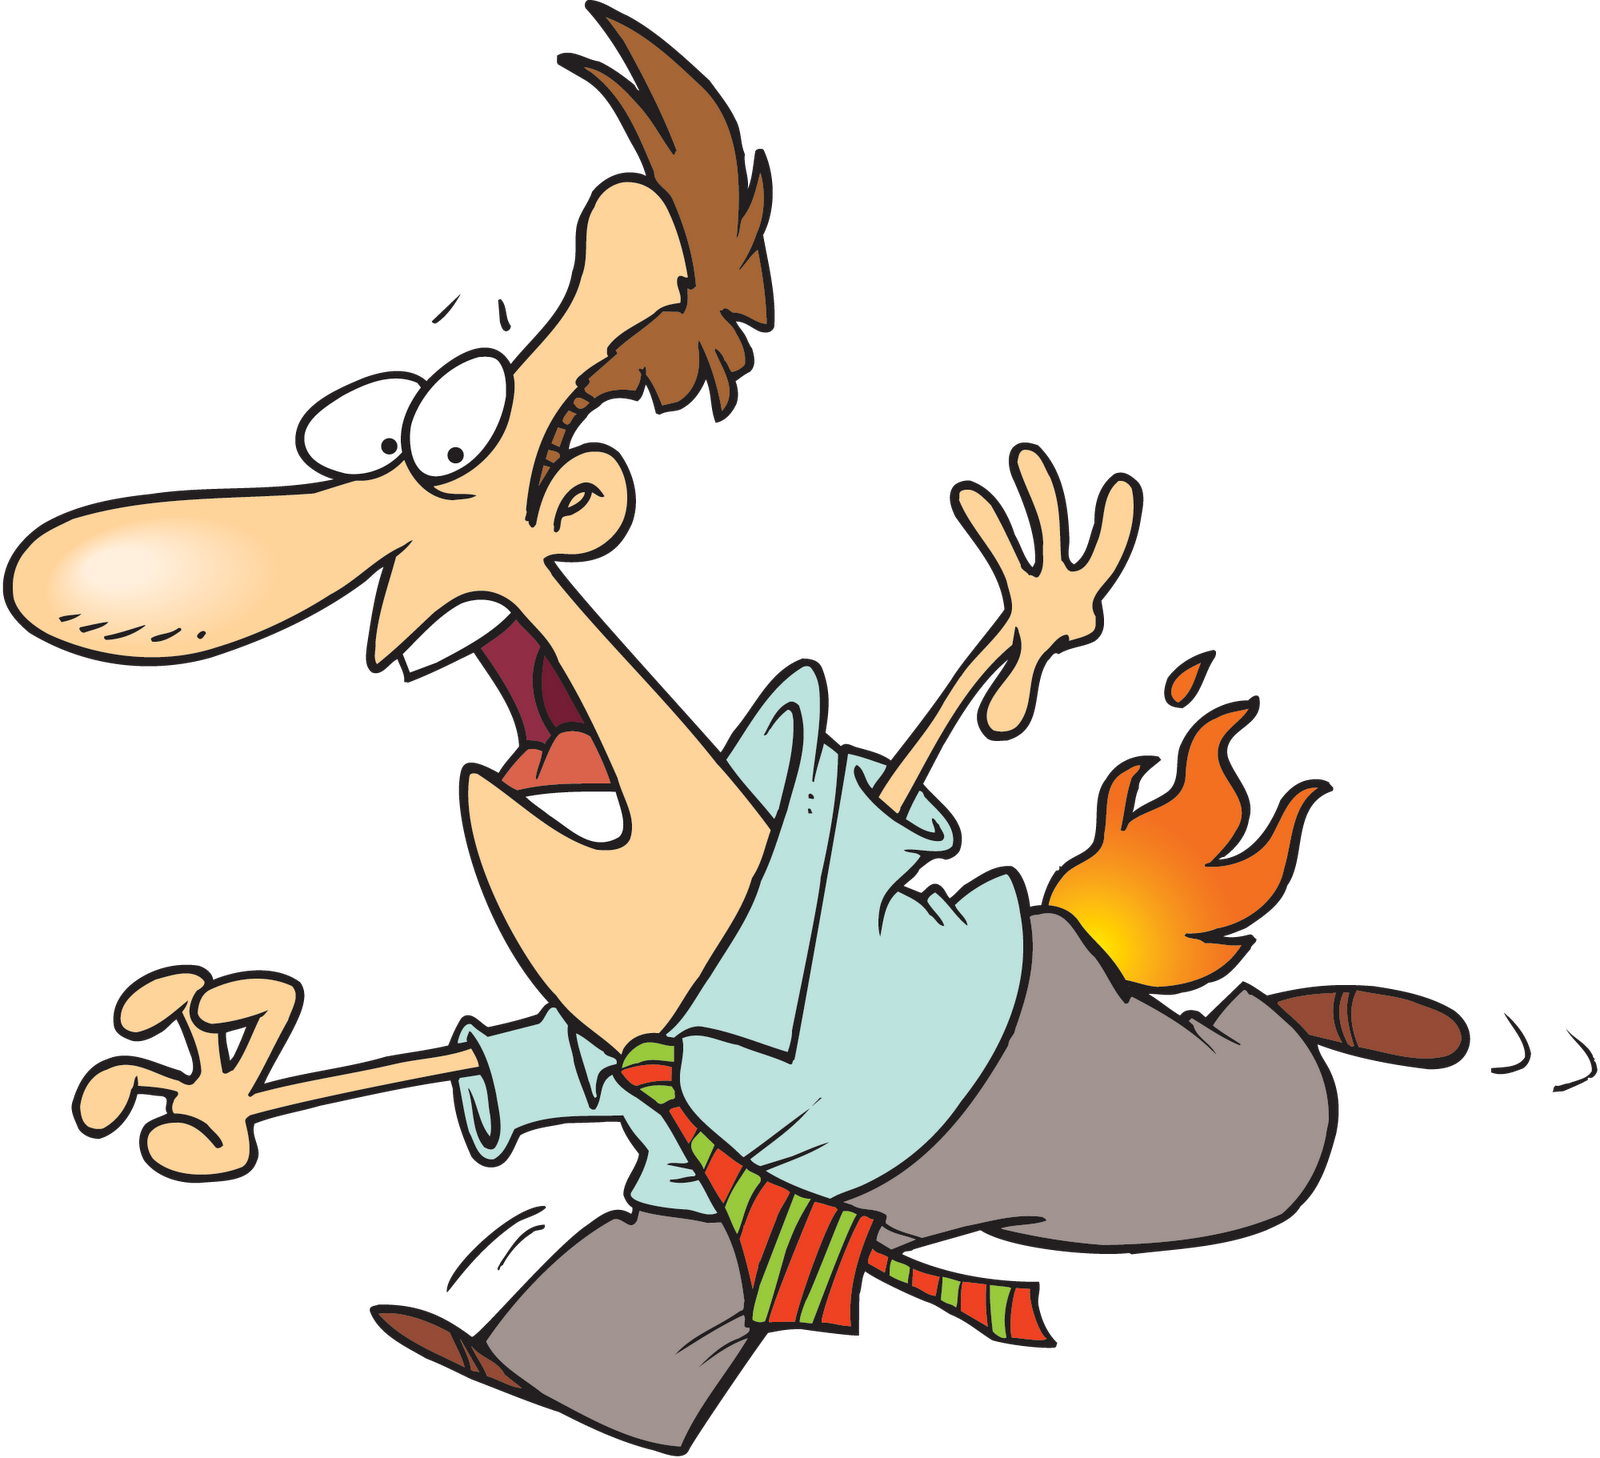 Cartoon Hut On Fire | Clipart library - Free Clipart Images